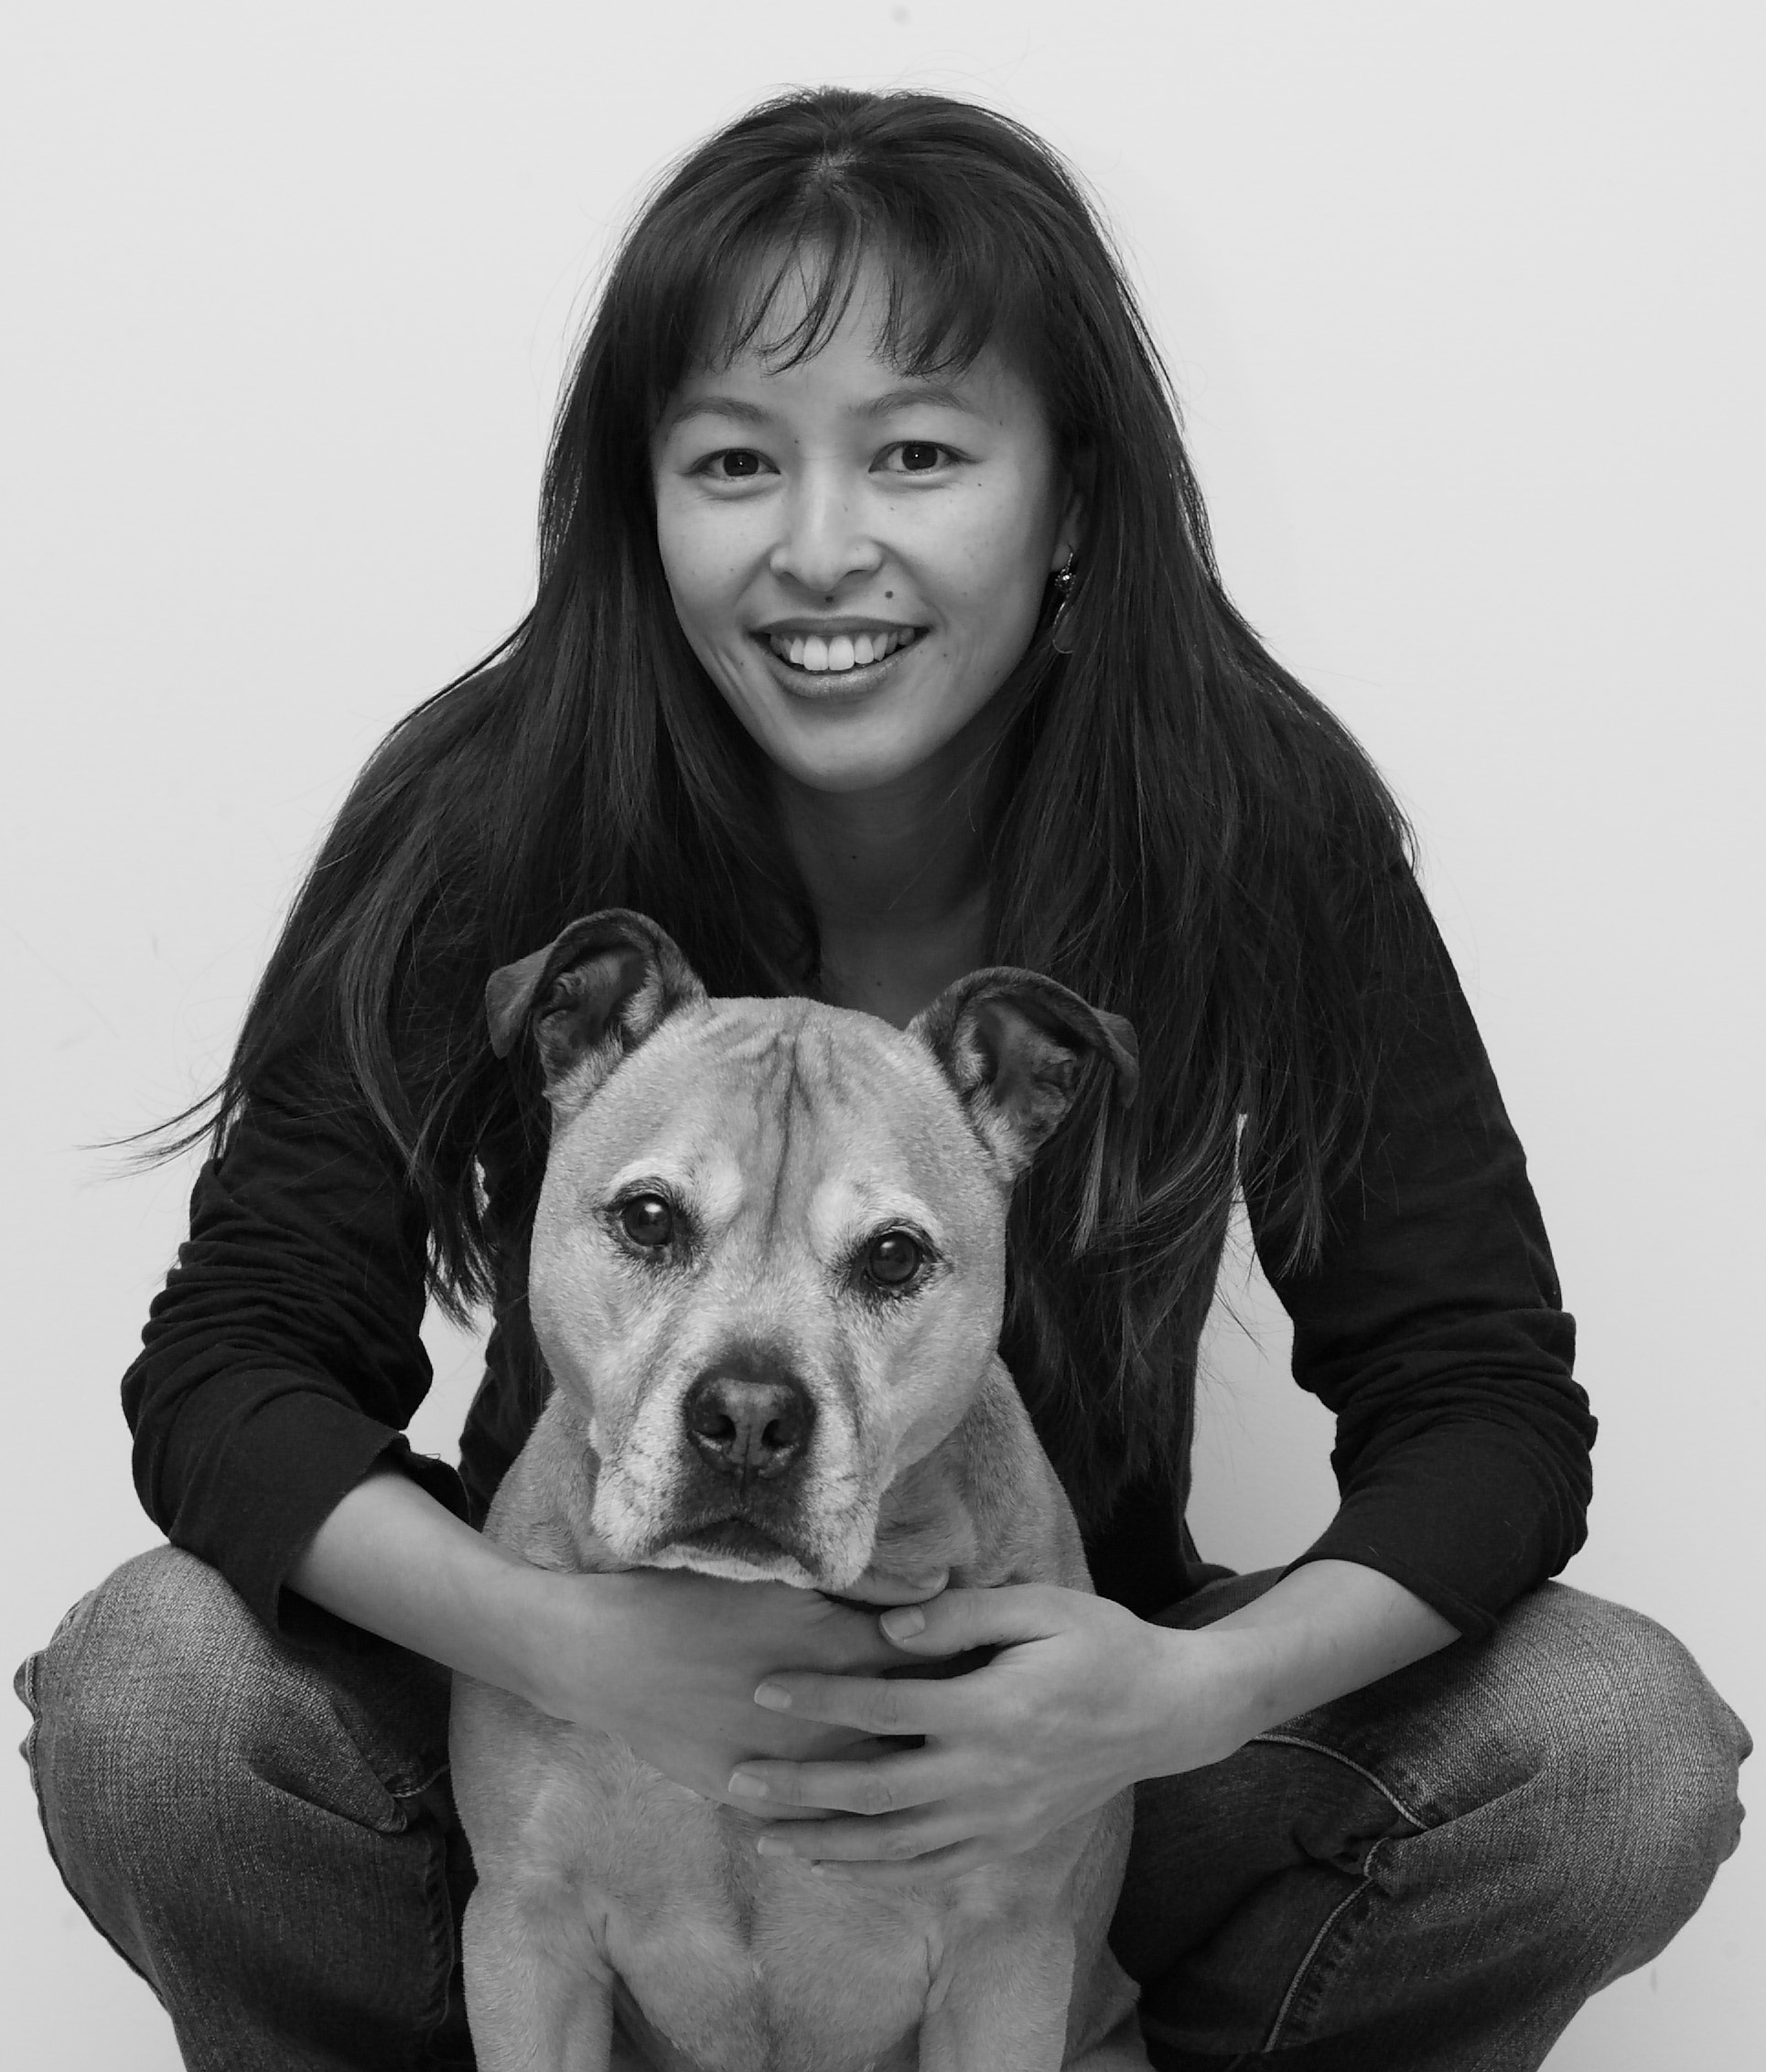 Justine Lee and a dog